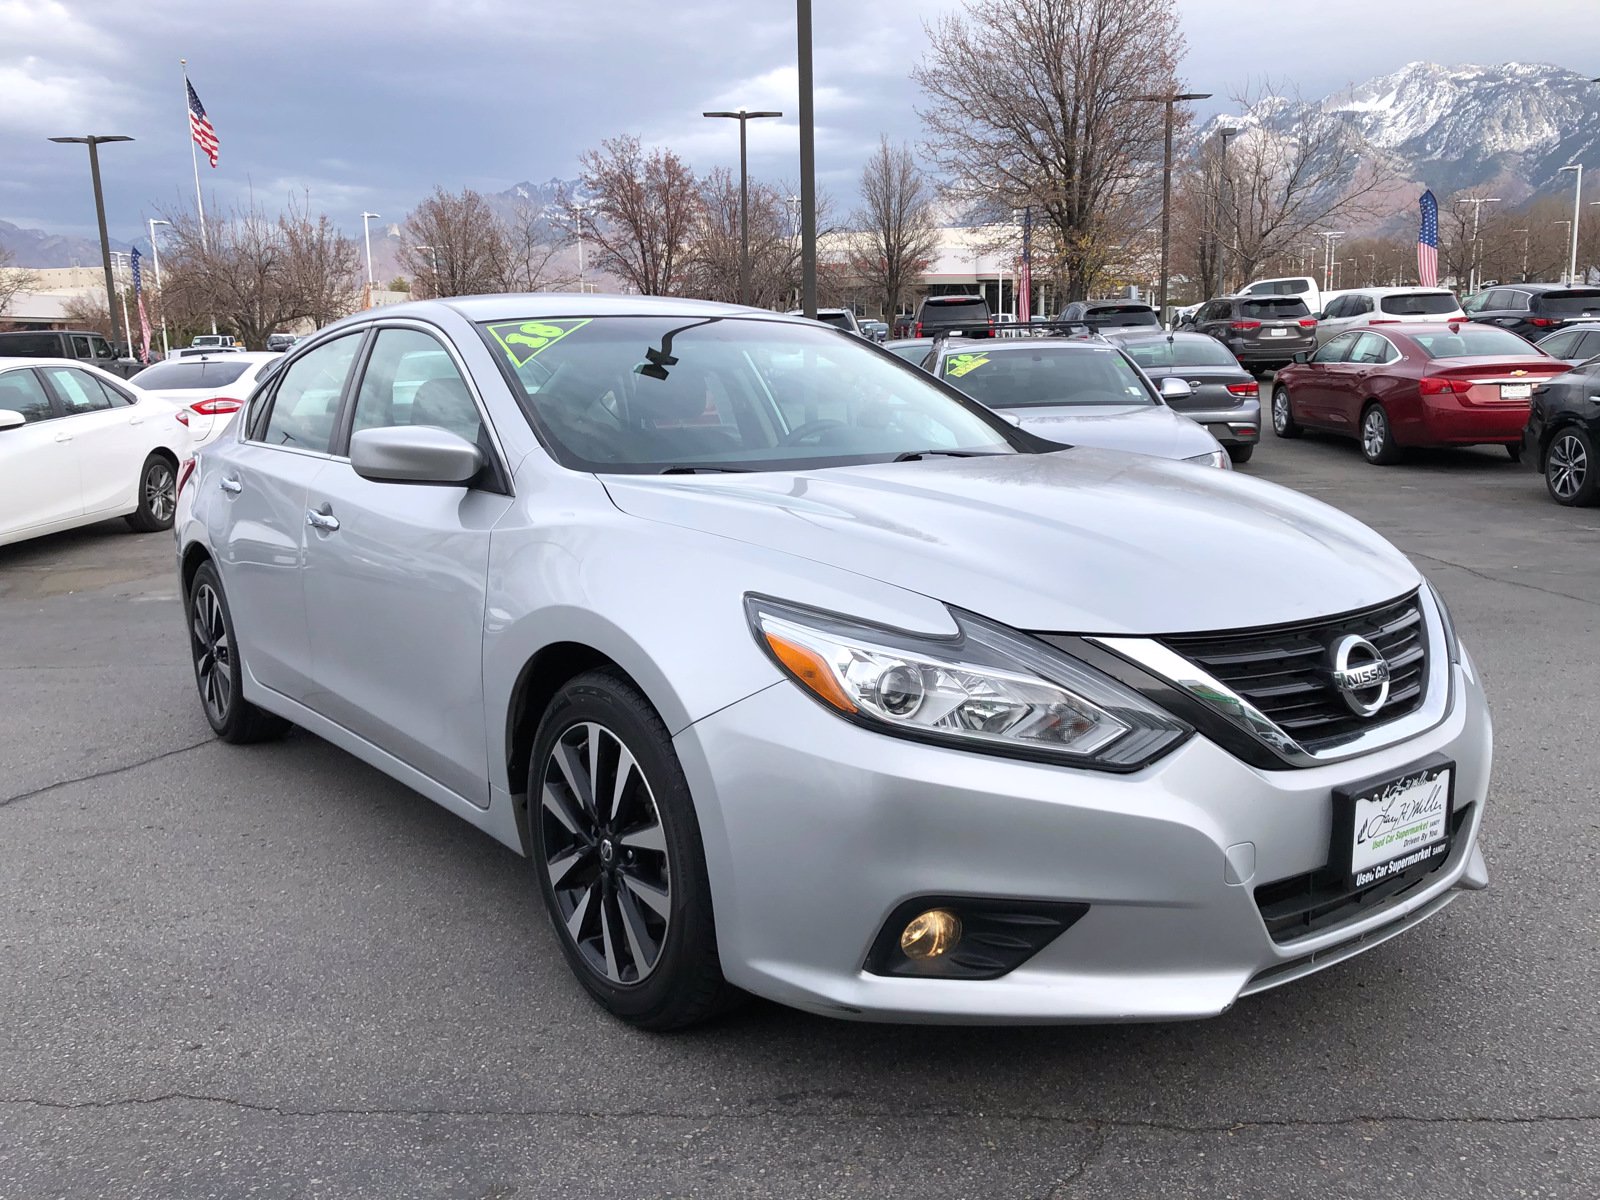 PreOwned 2018 Nissan Altima 2.5 SV 4dr Car in Sandy 